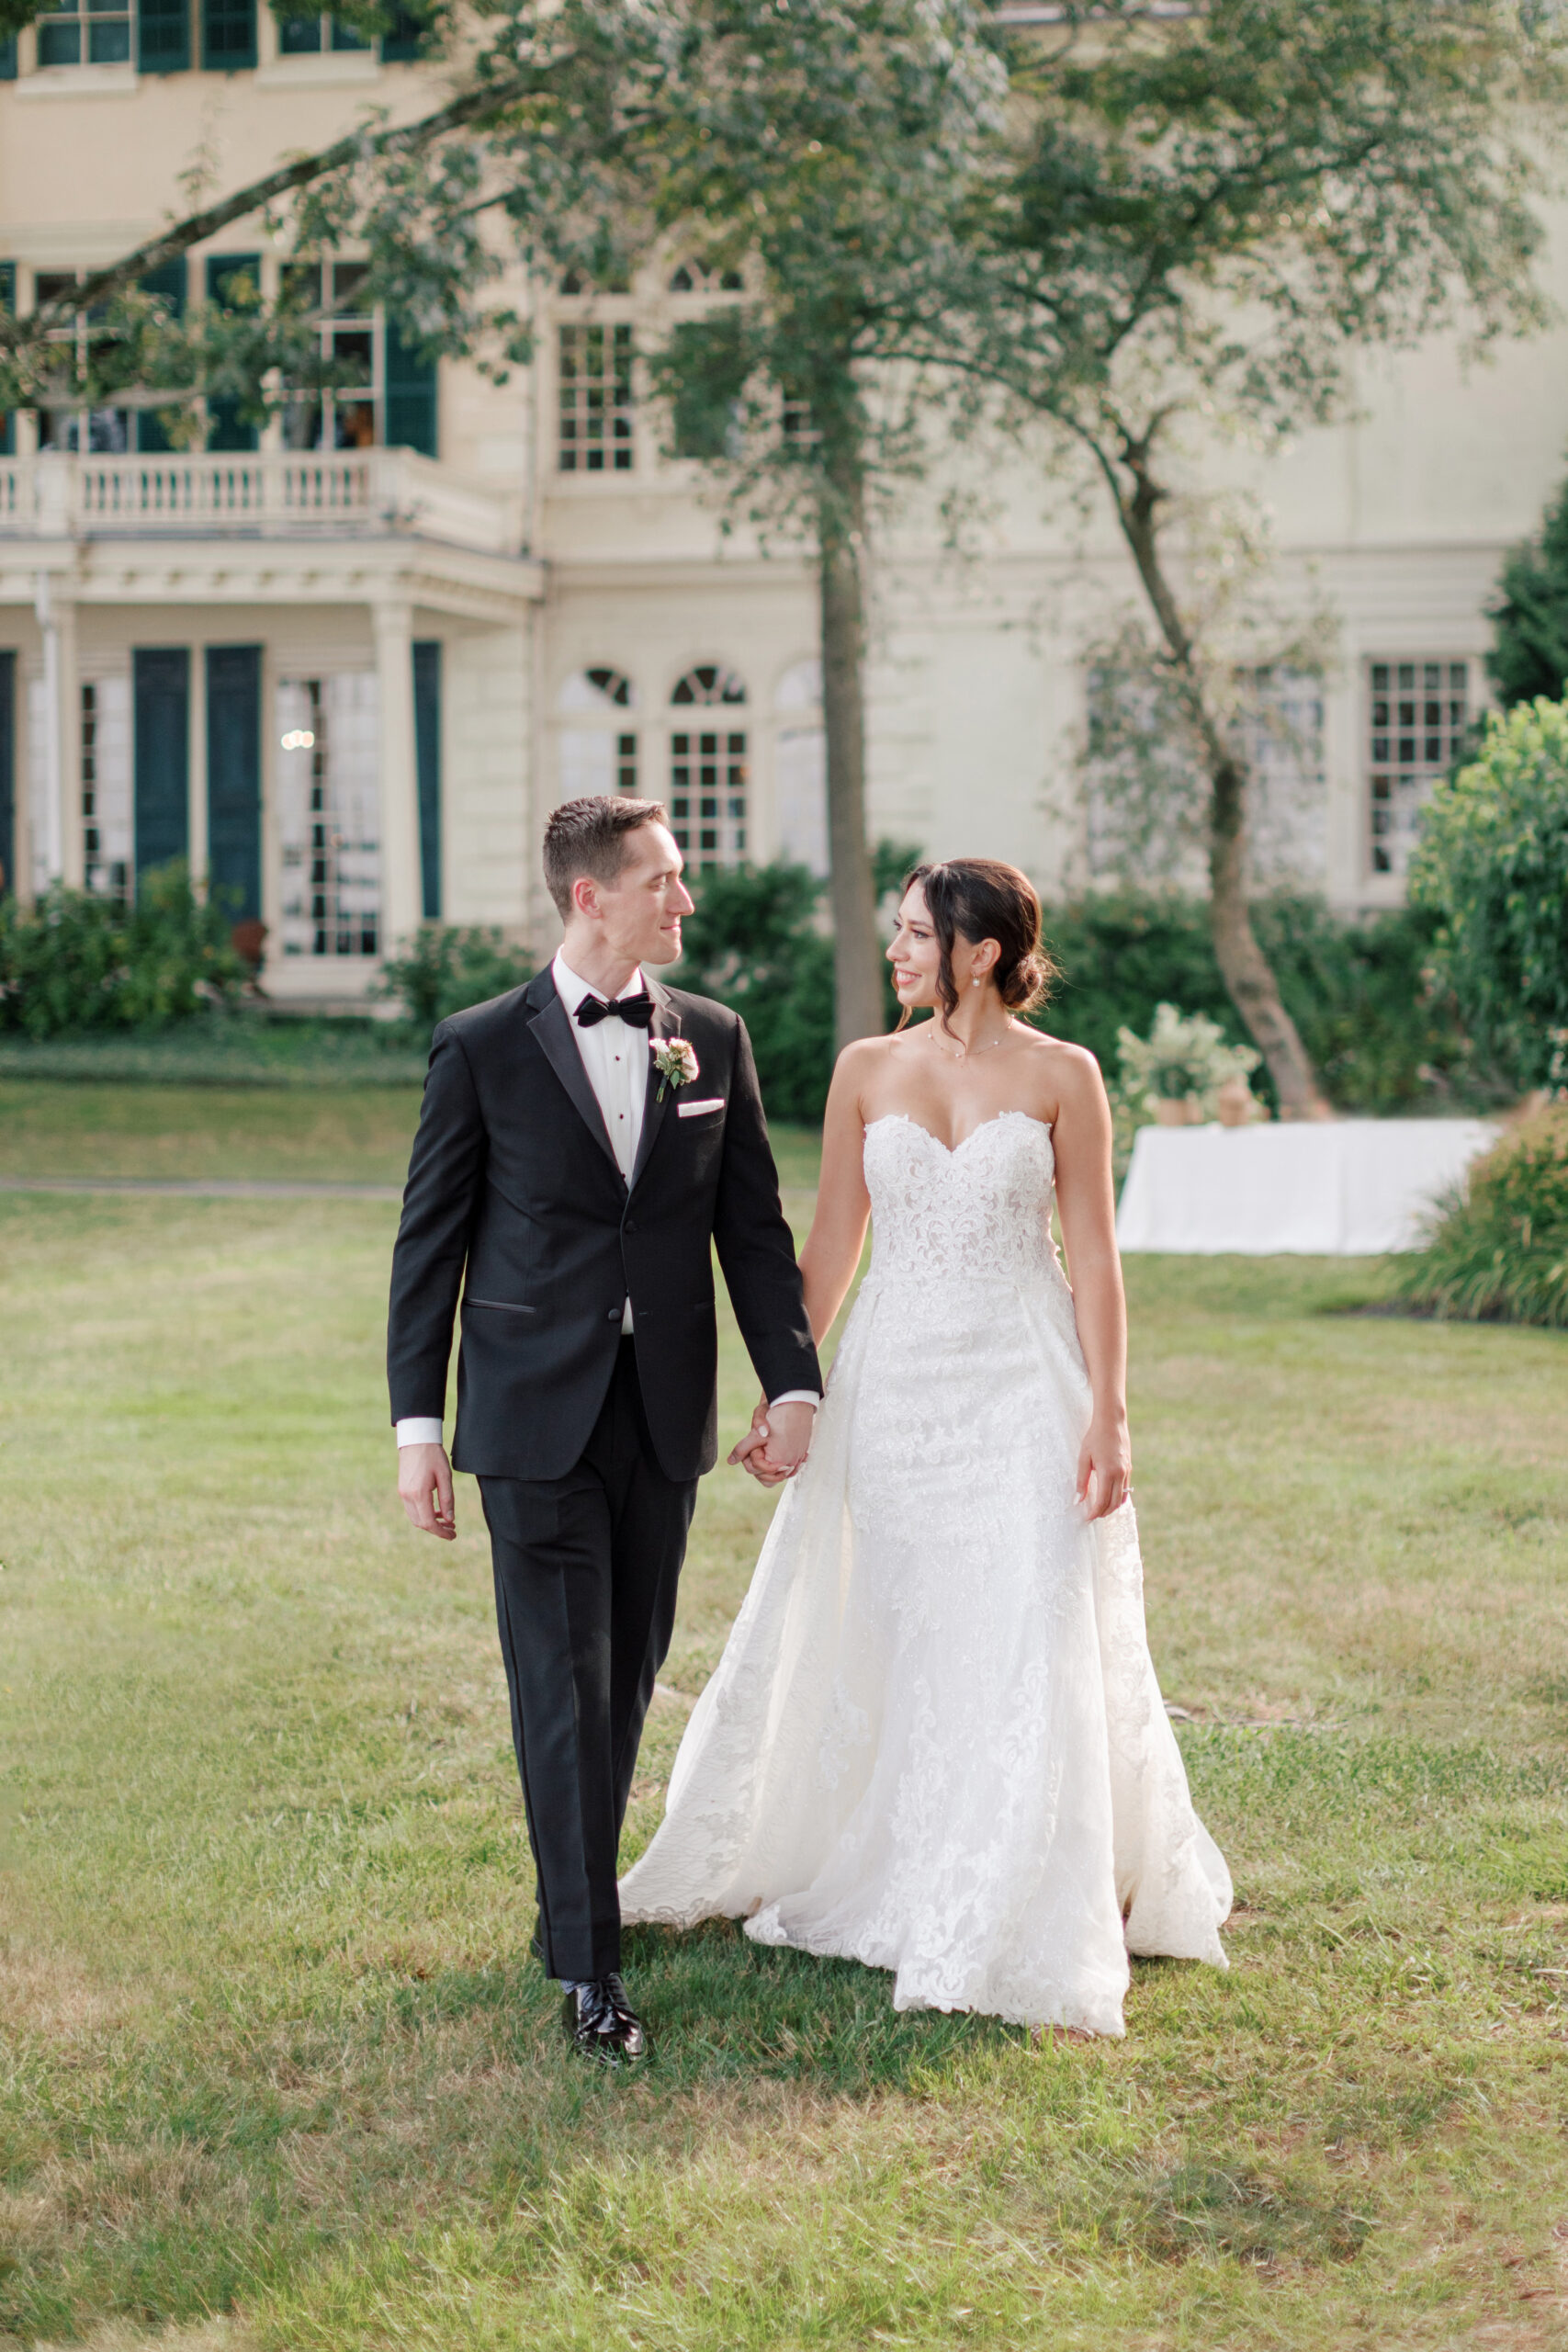 Bride and groom walking hand in hand in front of their wedding venue | Image by Hope Helmuth